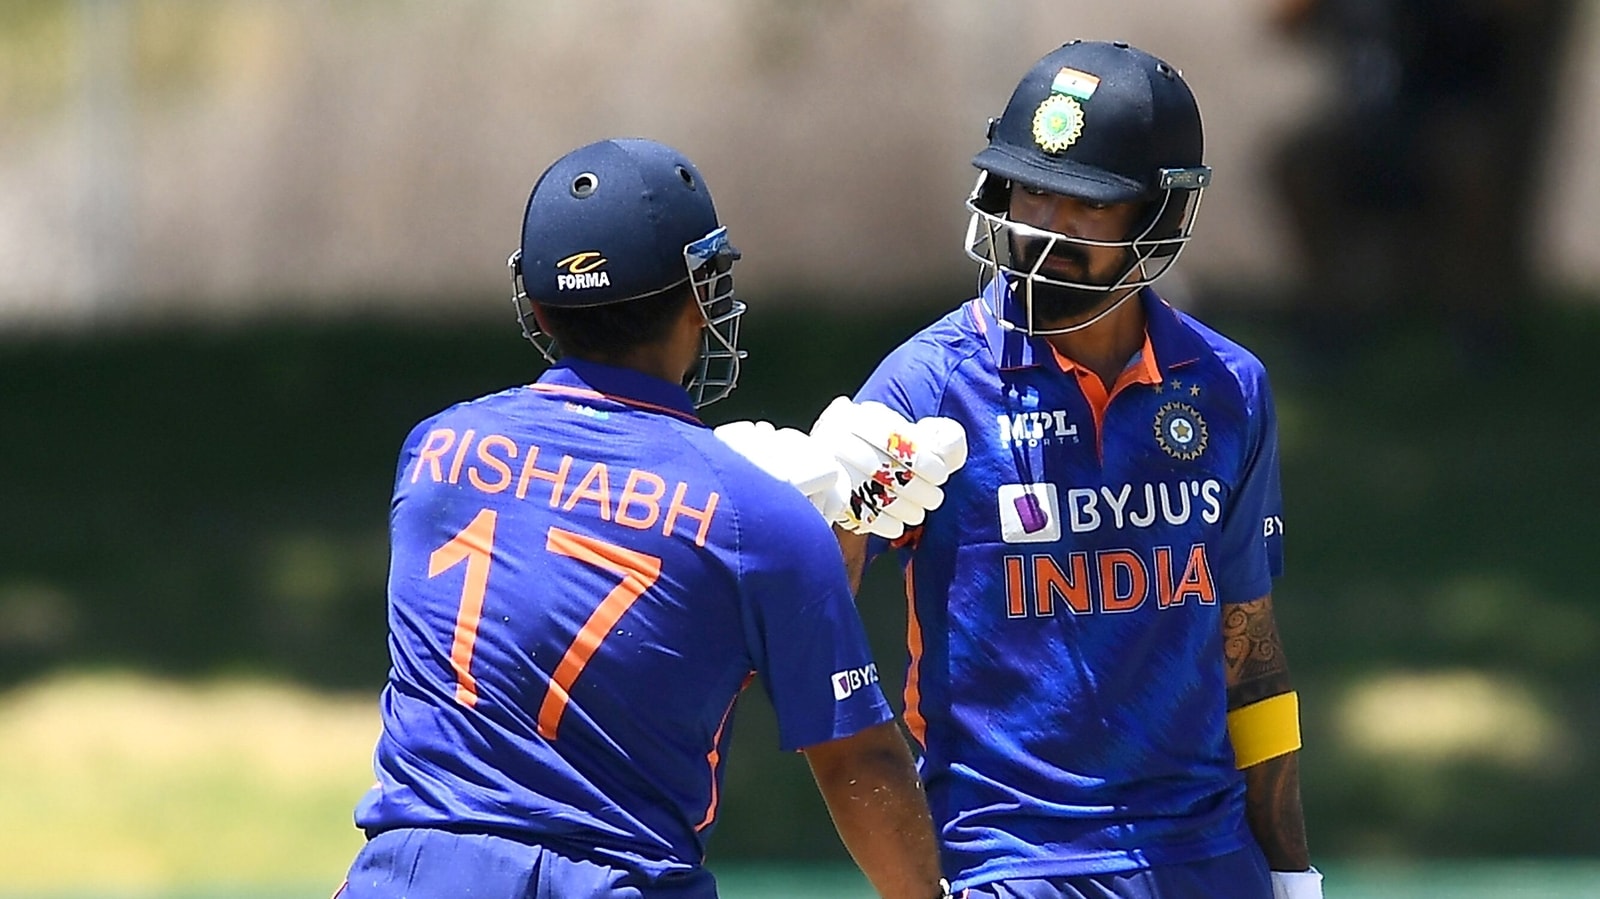 India vs South Africa 3rd ODI Live Streaming When and where to watch Live on TV Cricket